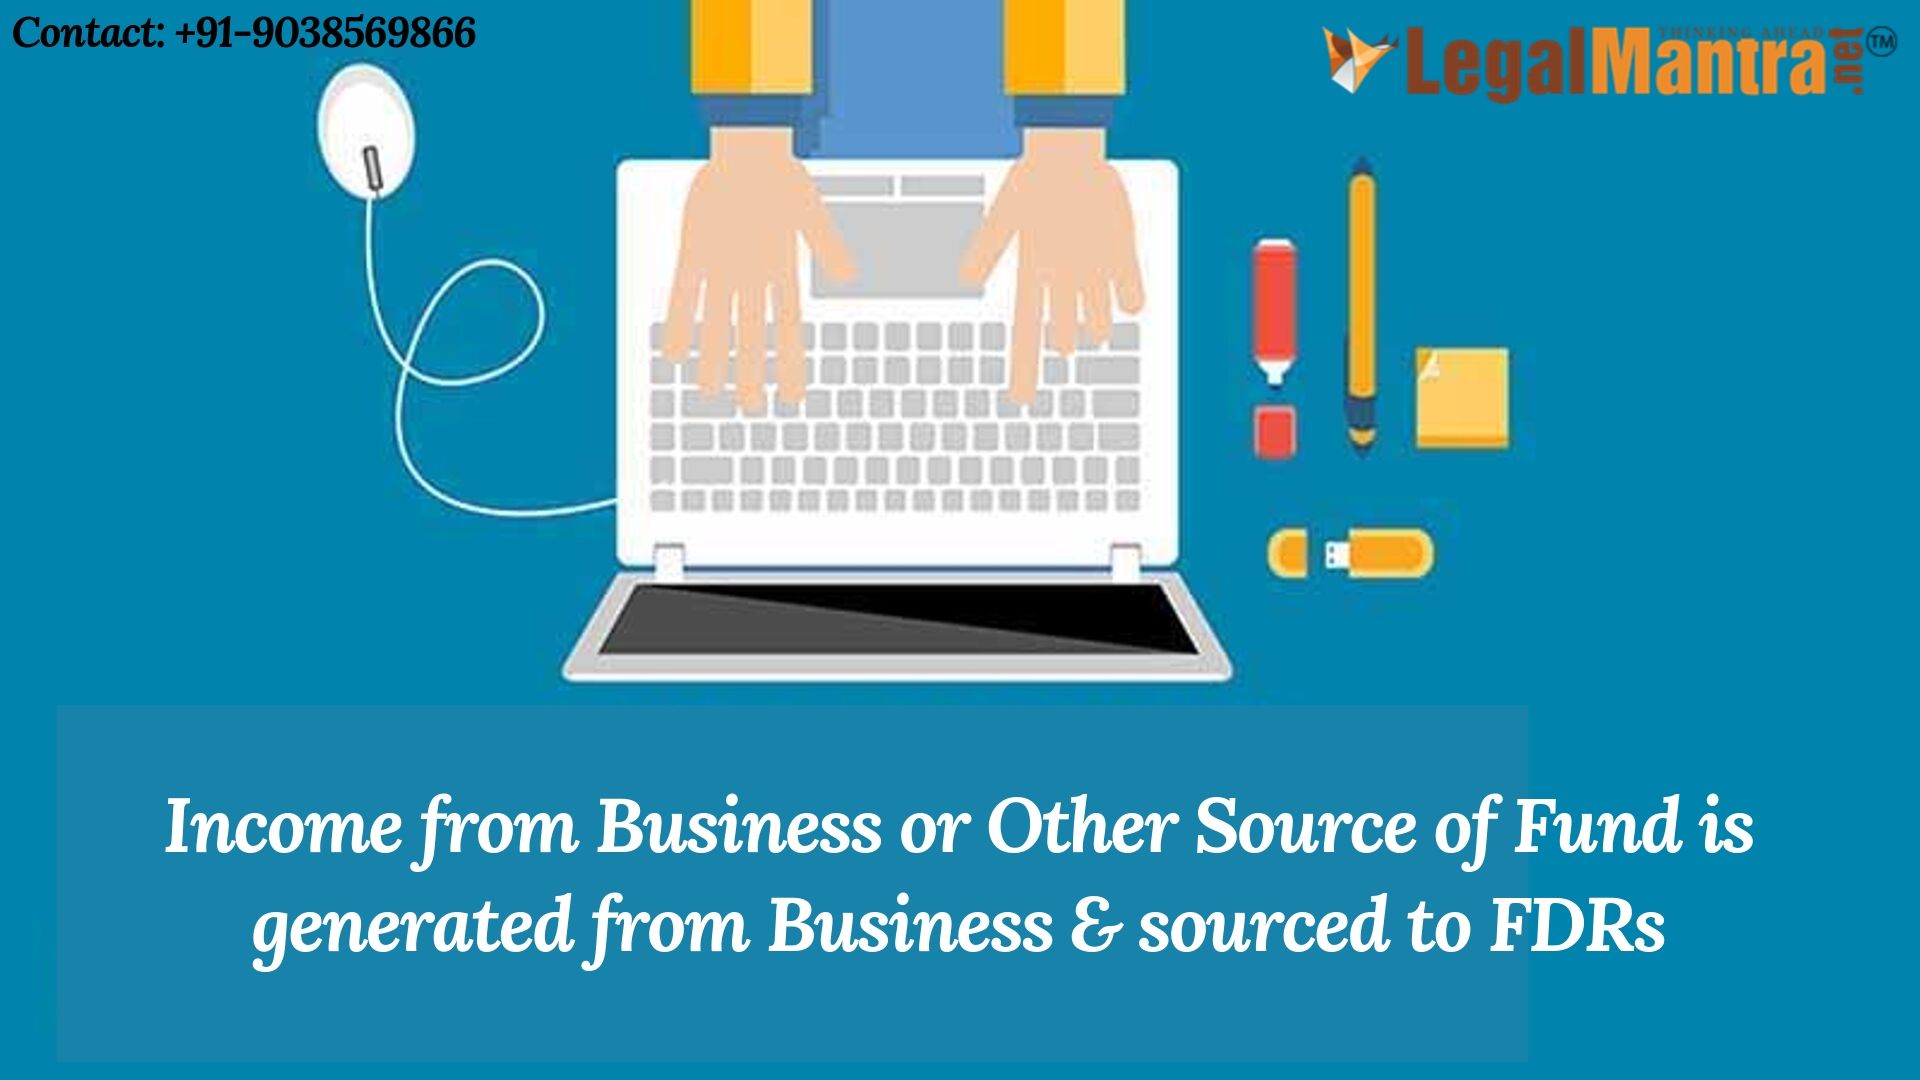 Income from Business or Other Source of Fund is generated from Business & sourced to FDRs